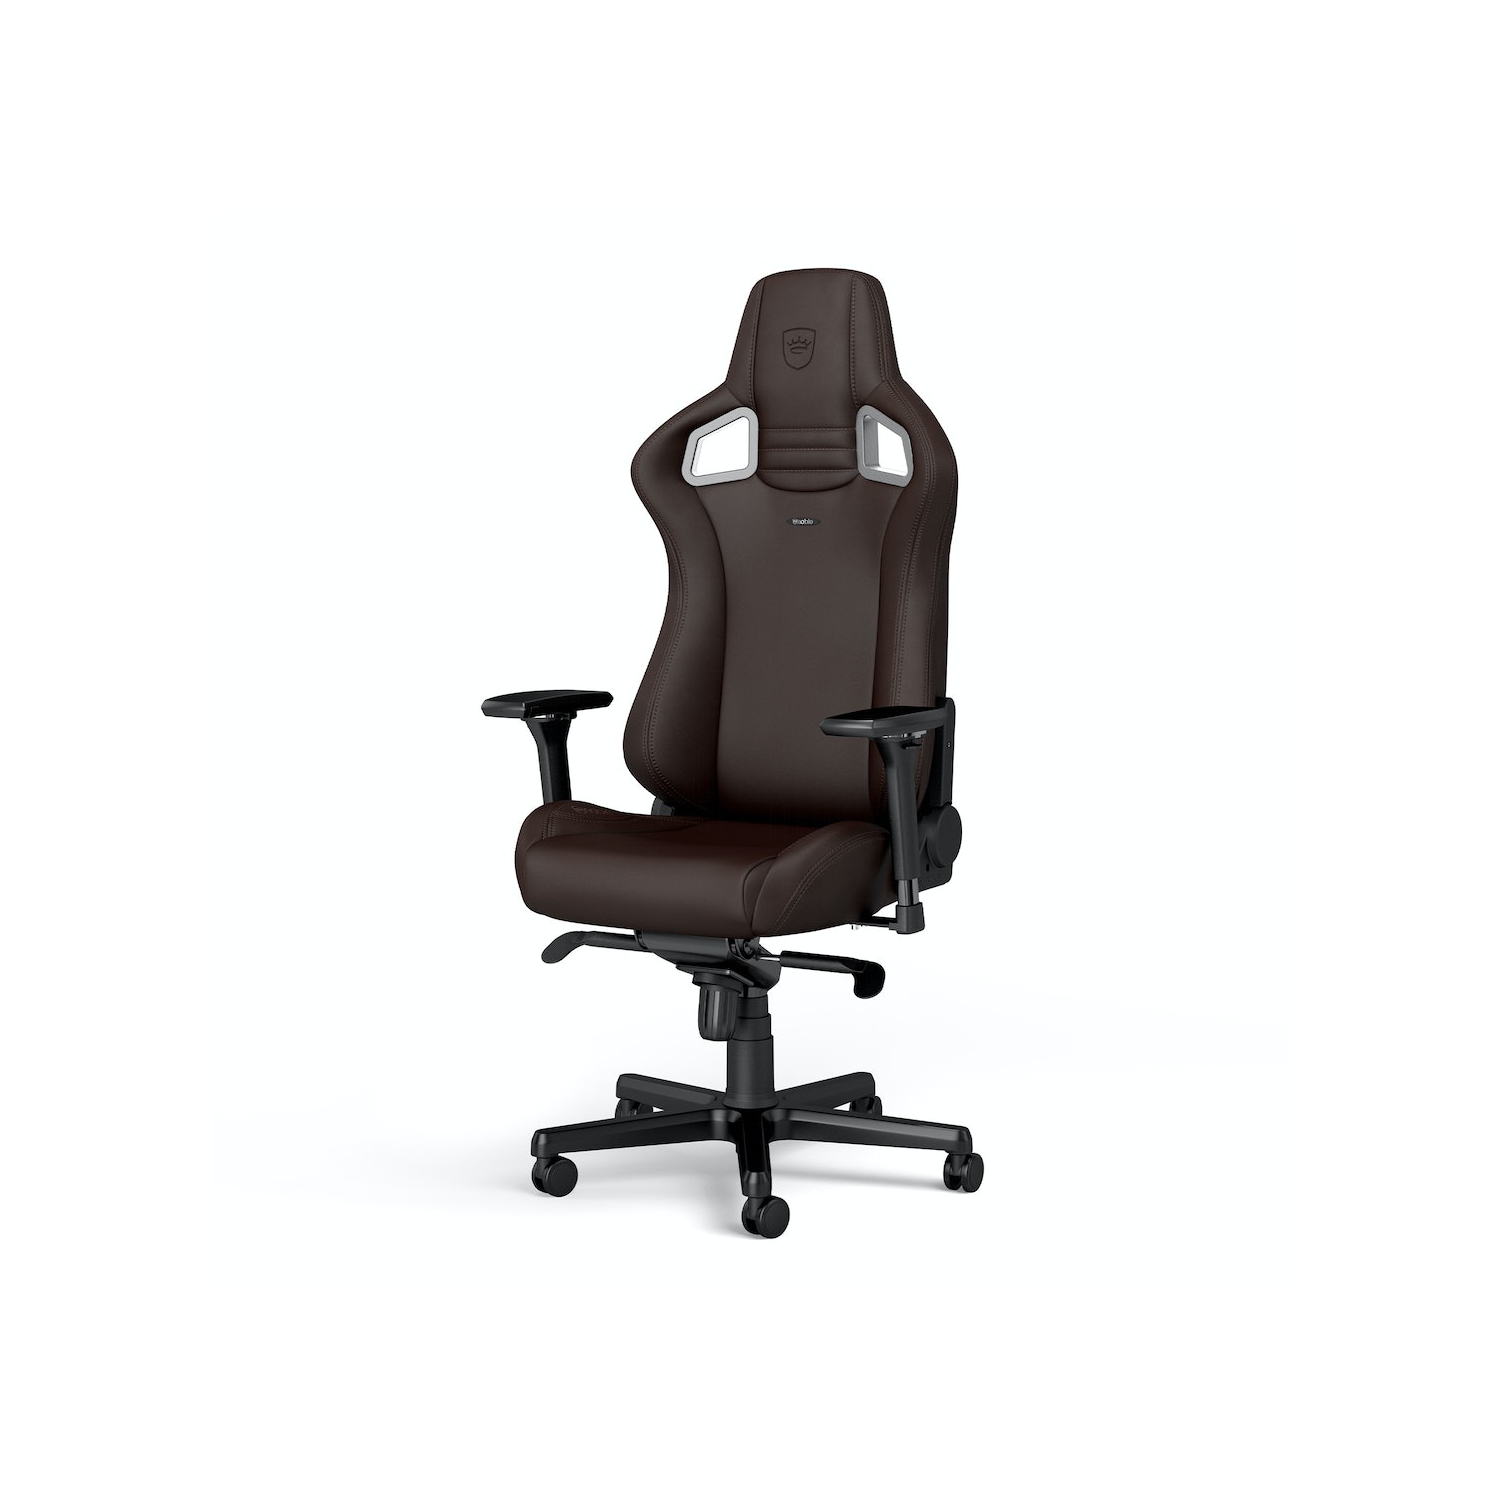 PRO GAMERSWARE NOBLECHAIRS EPIC SERIES JAVA EDITION